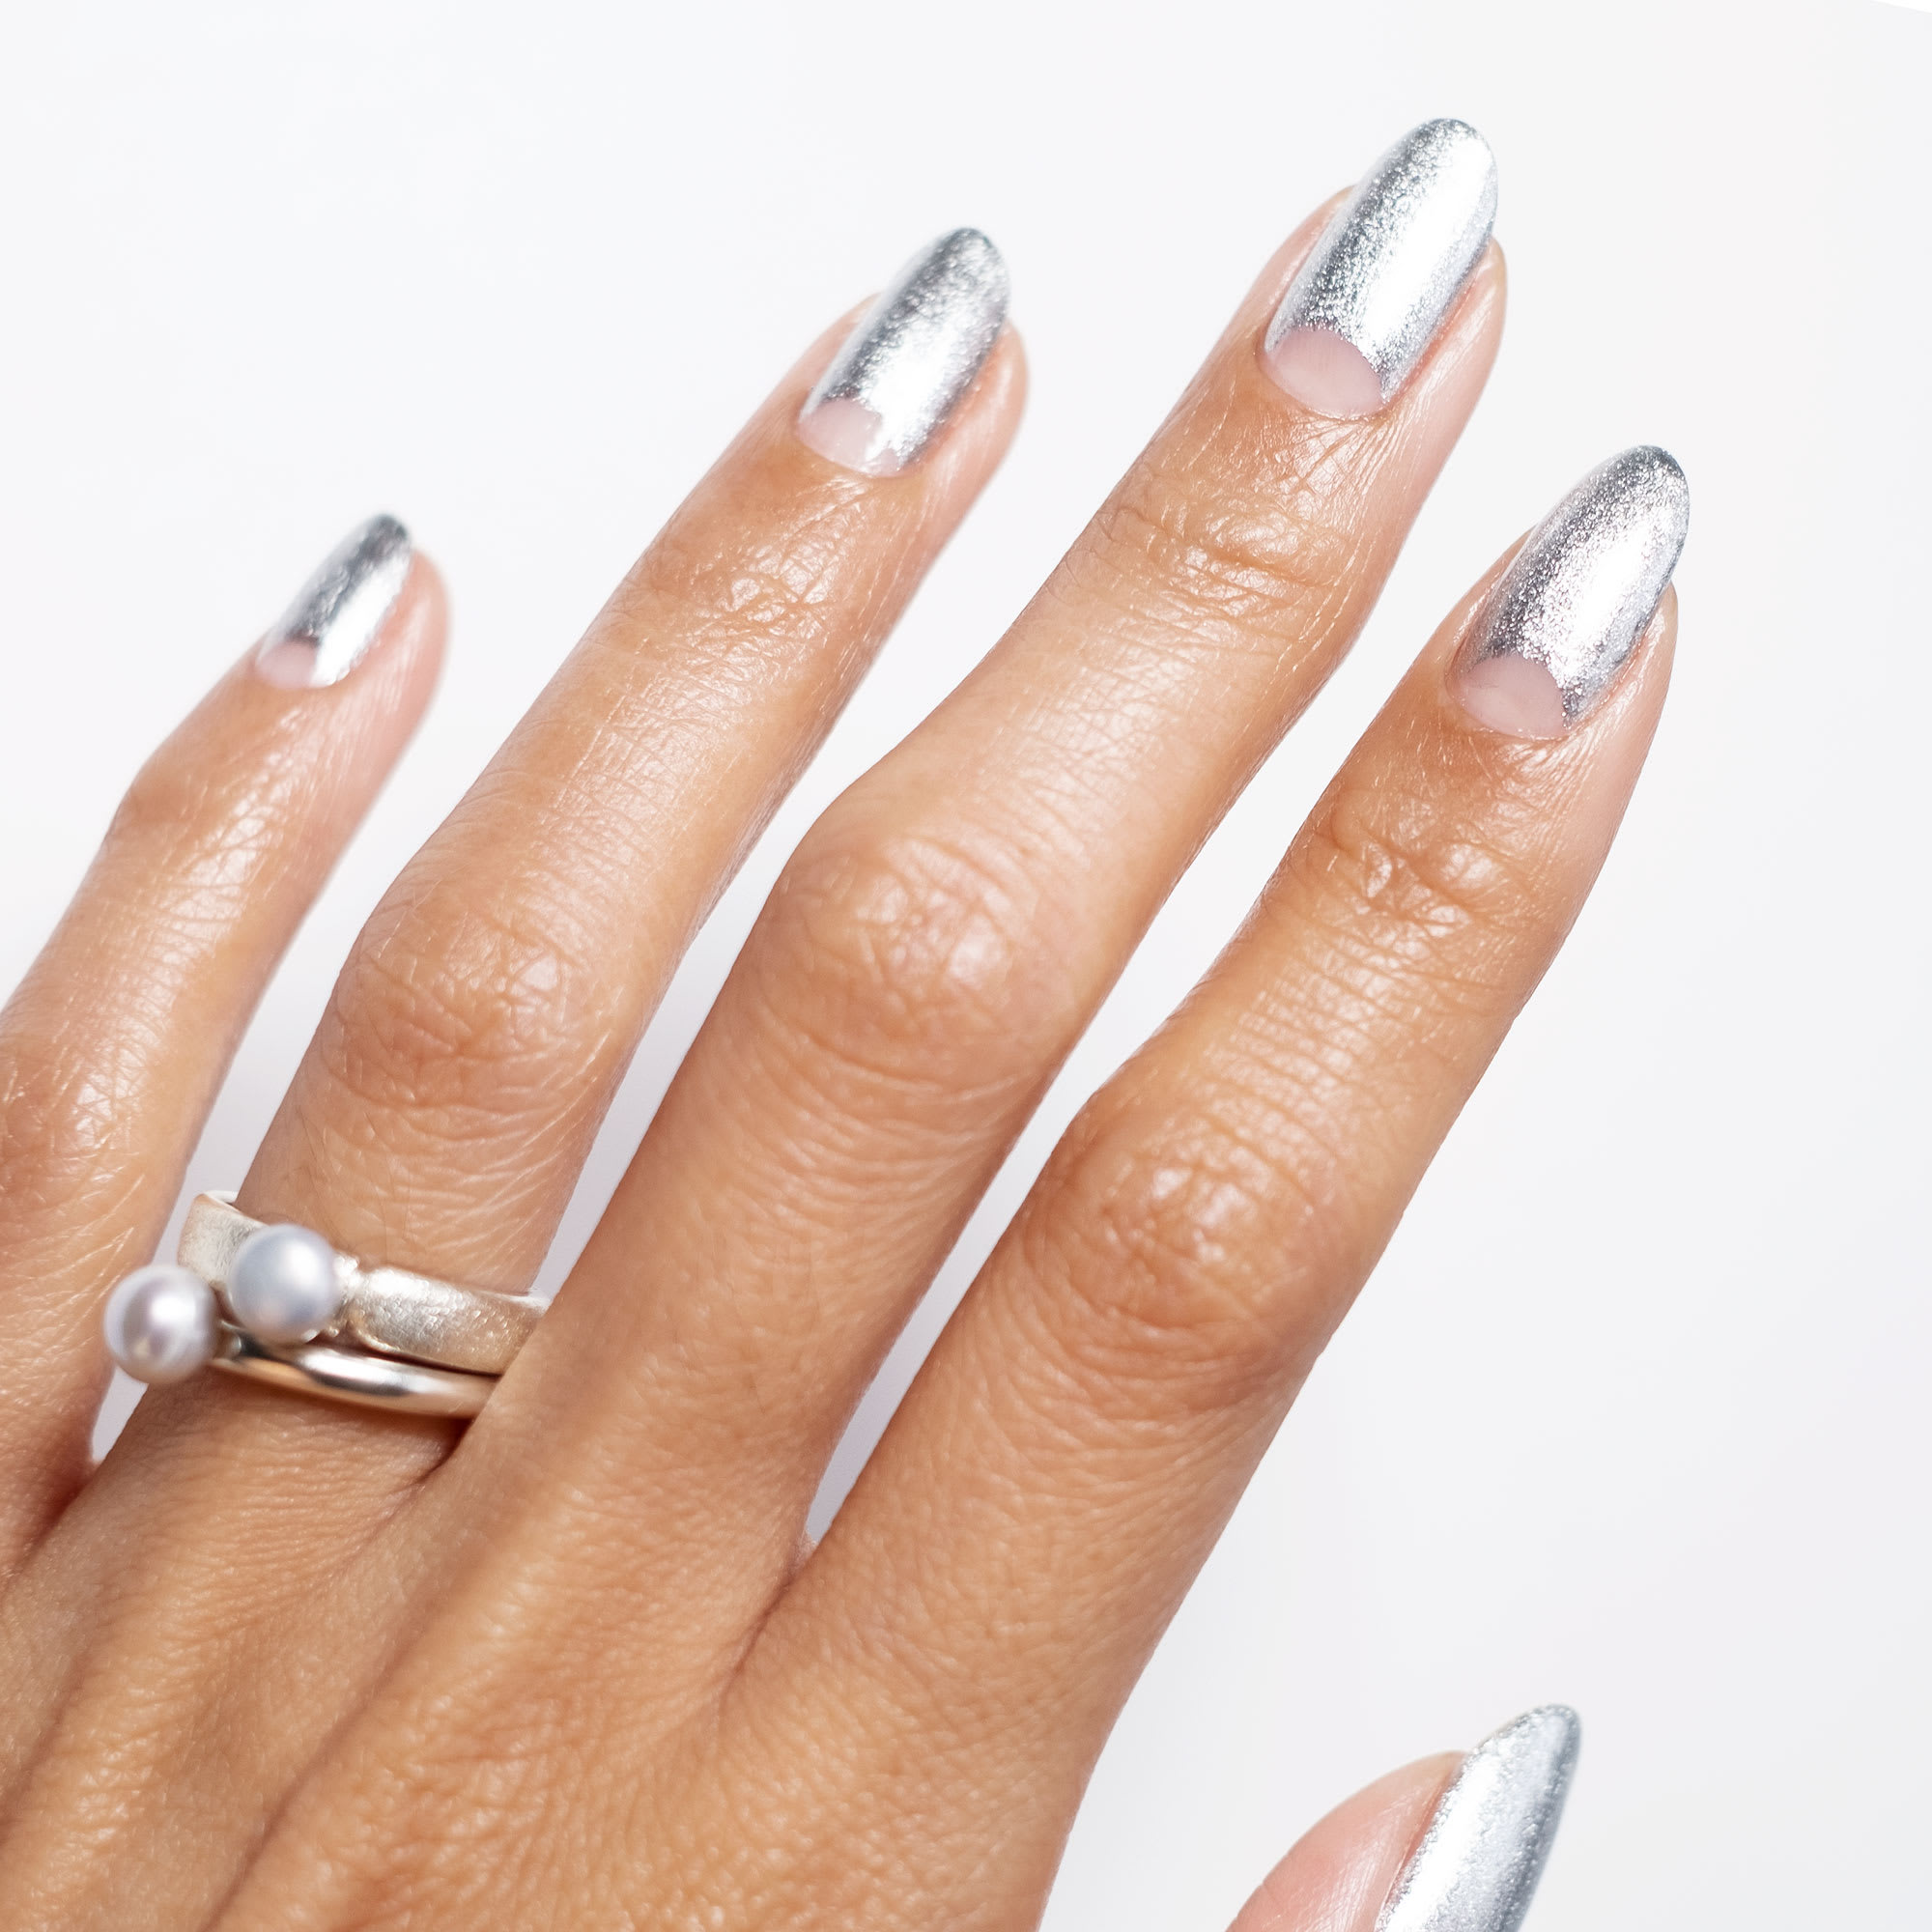 Prom Nails: 16 Mani Ideas To Complete Your Look  Fashion Blog